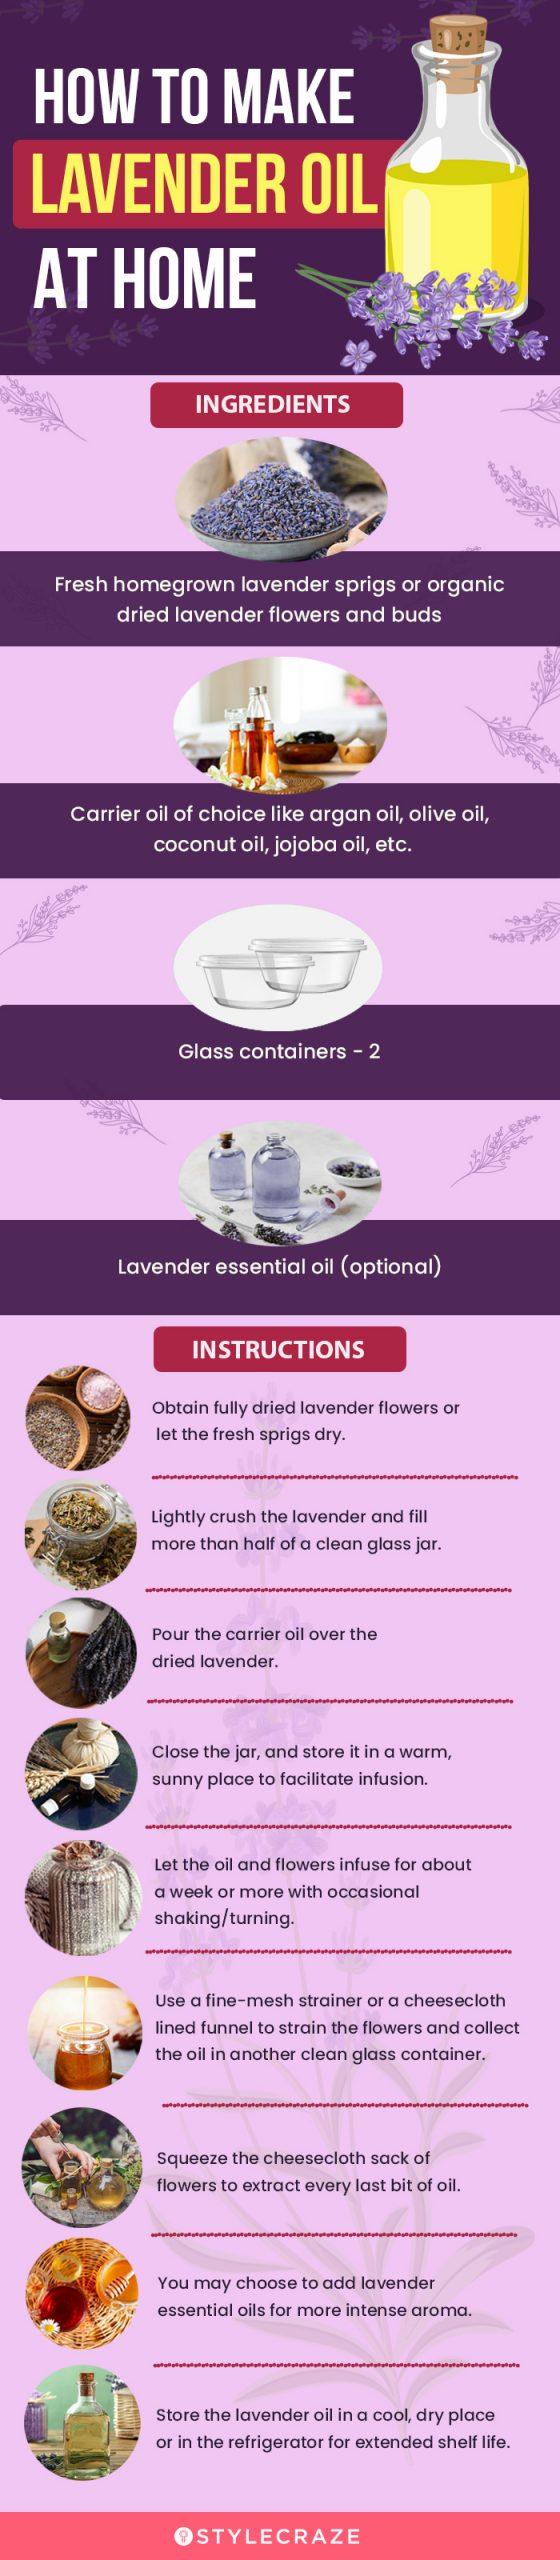 how to make lavender oil at home (infographic)